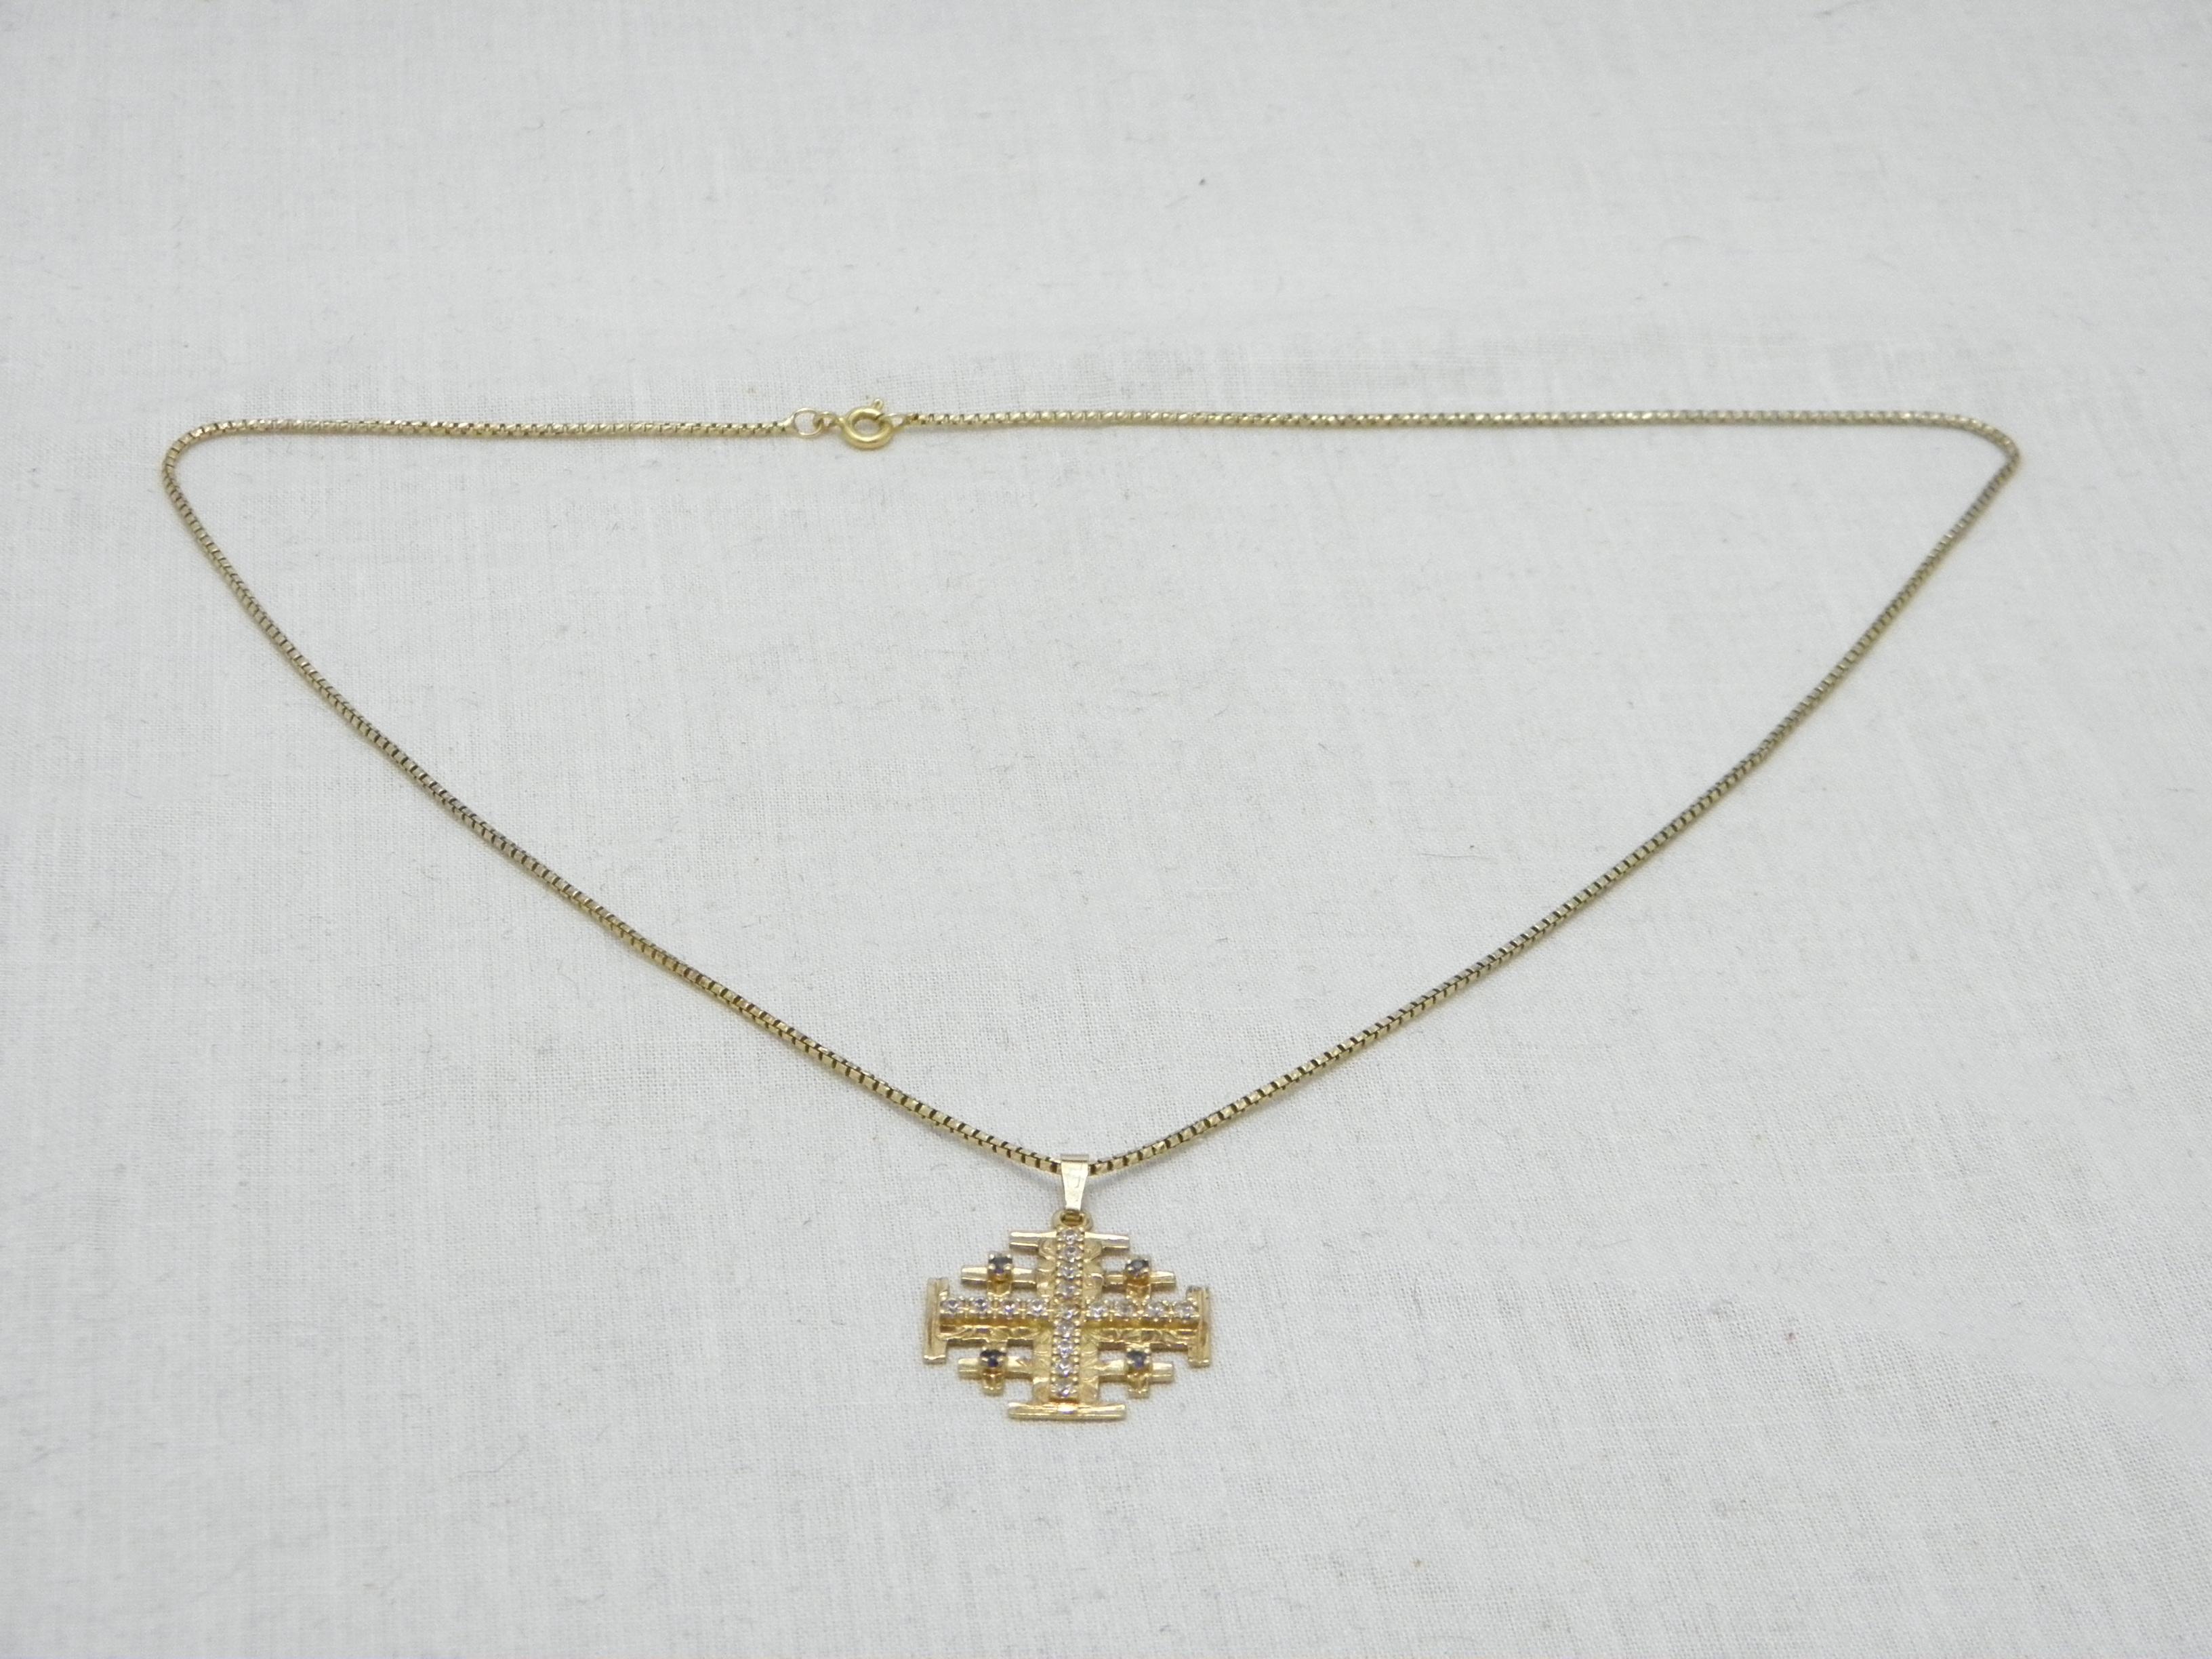 Vintage 14ct Gold Heavy Jerusalem Cross Pendant Necklace Box Chain 585 19 Inch In Good Condition For Sale In Camelford, GB